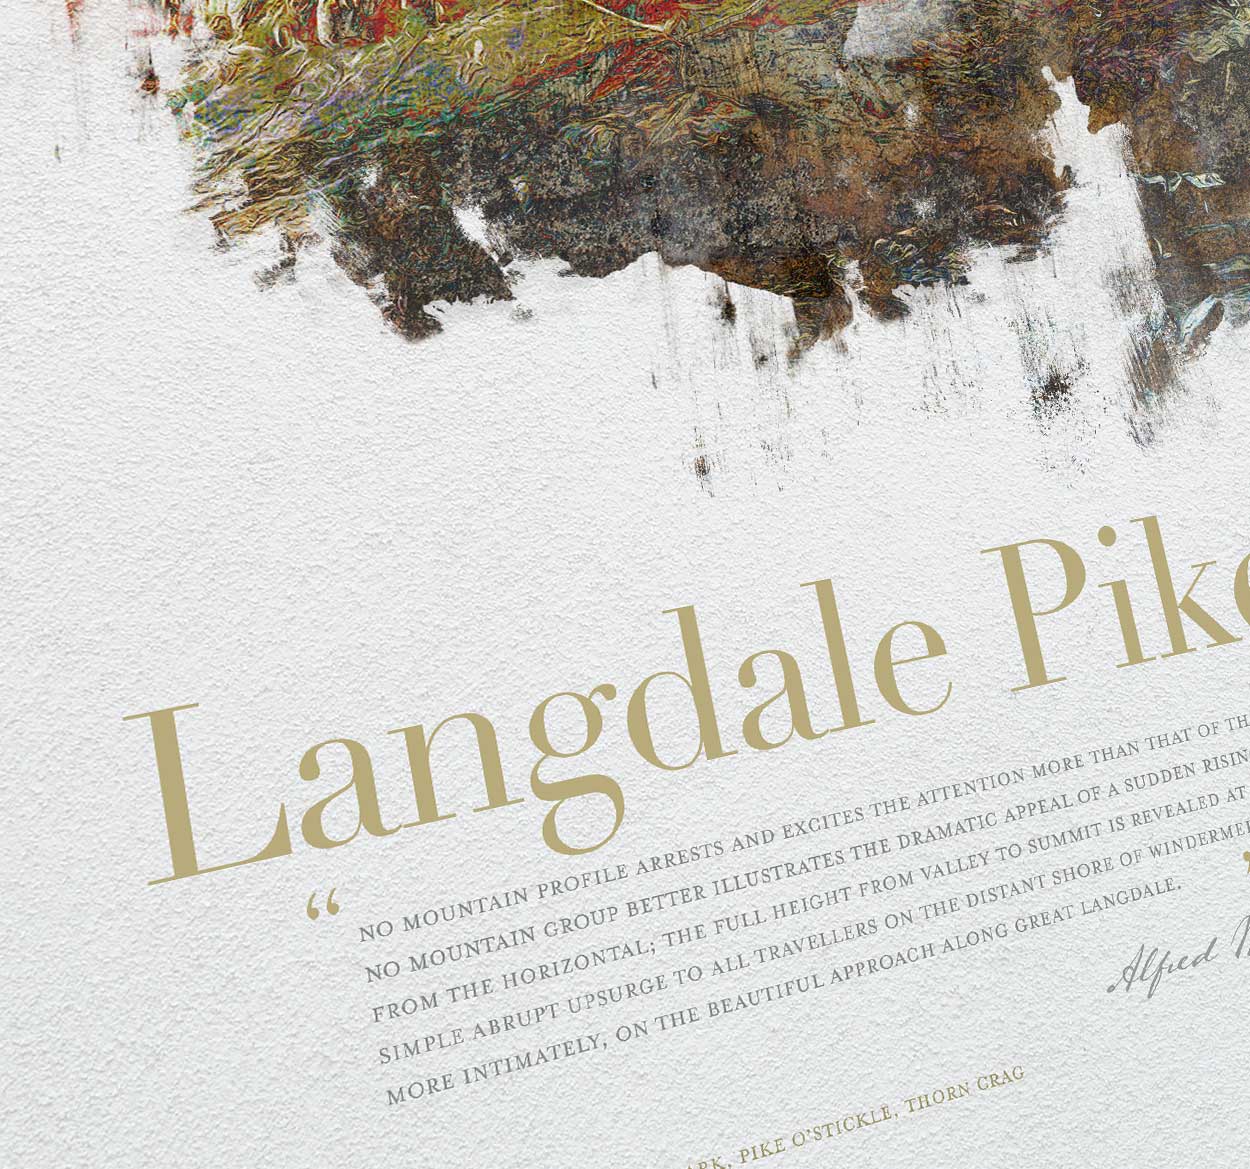 Langdale Pikes Lake District poster print abstract style art